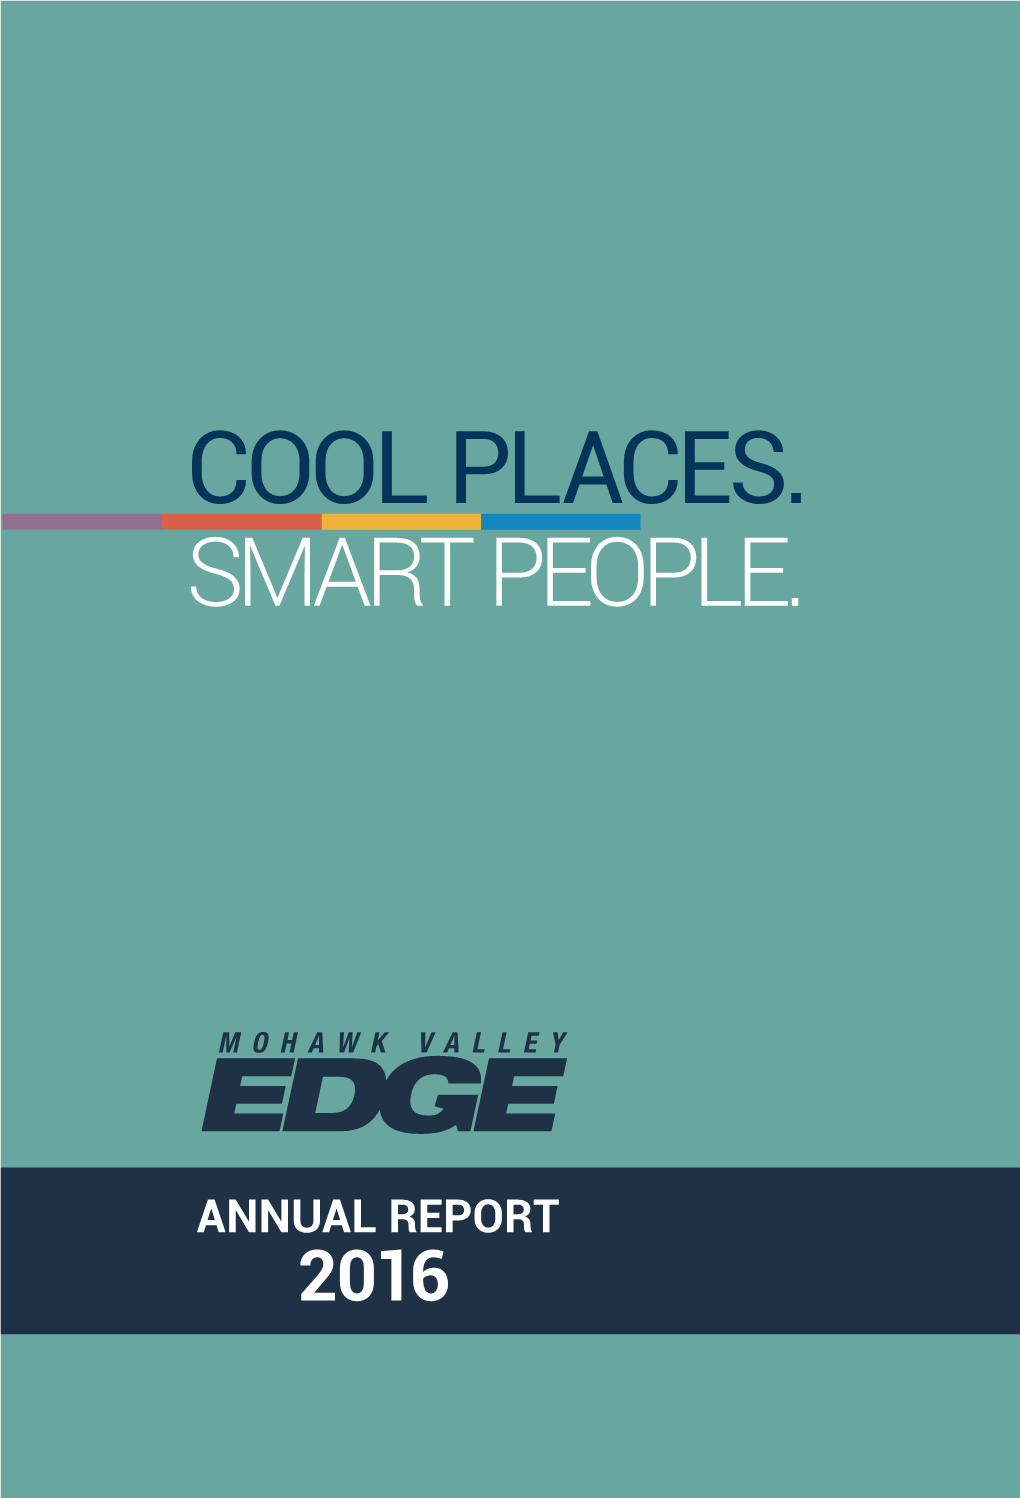 Annual Report 2016: Cool Places. Smart People